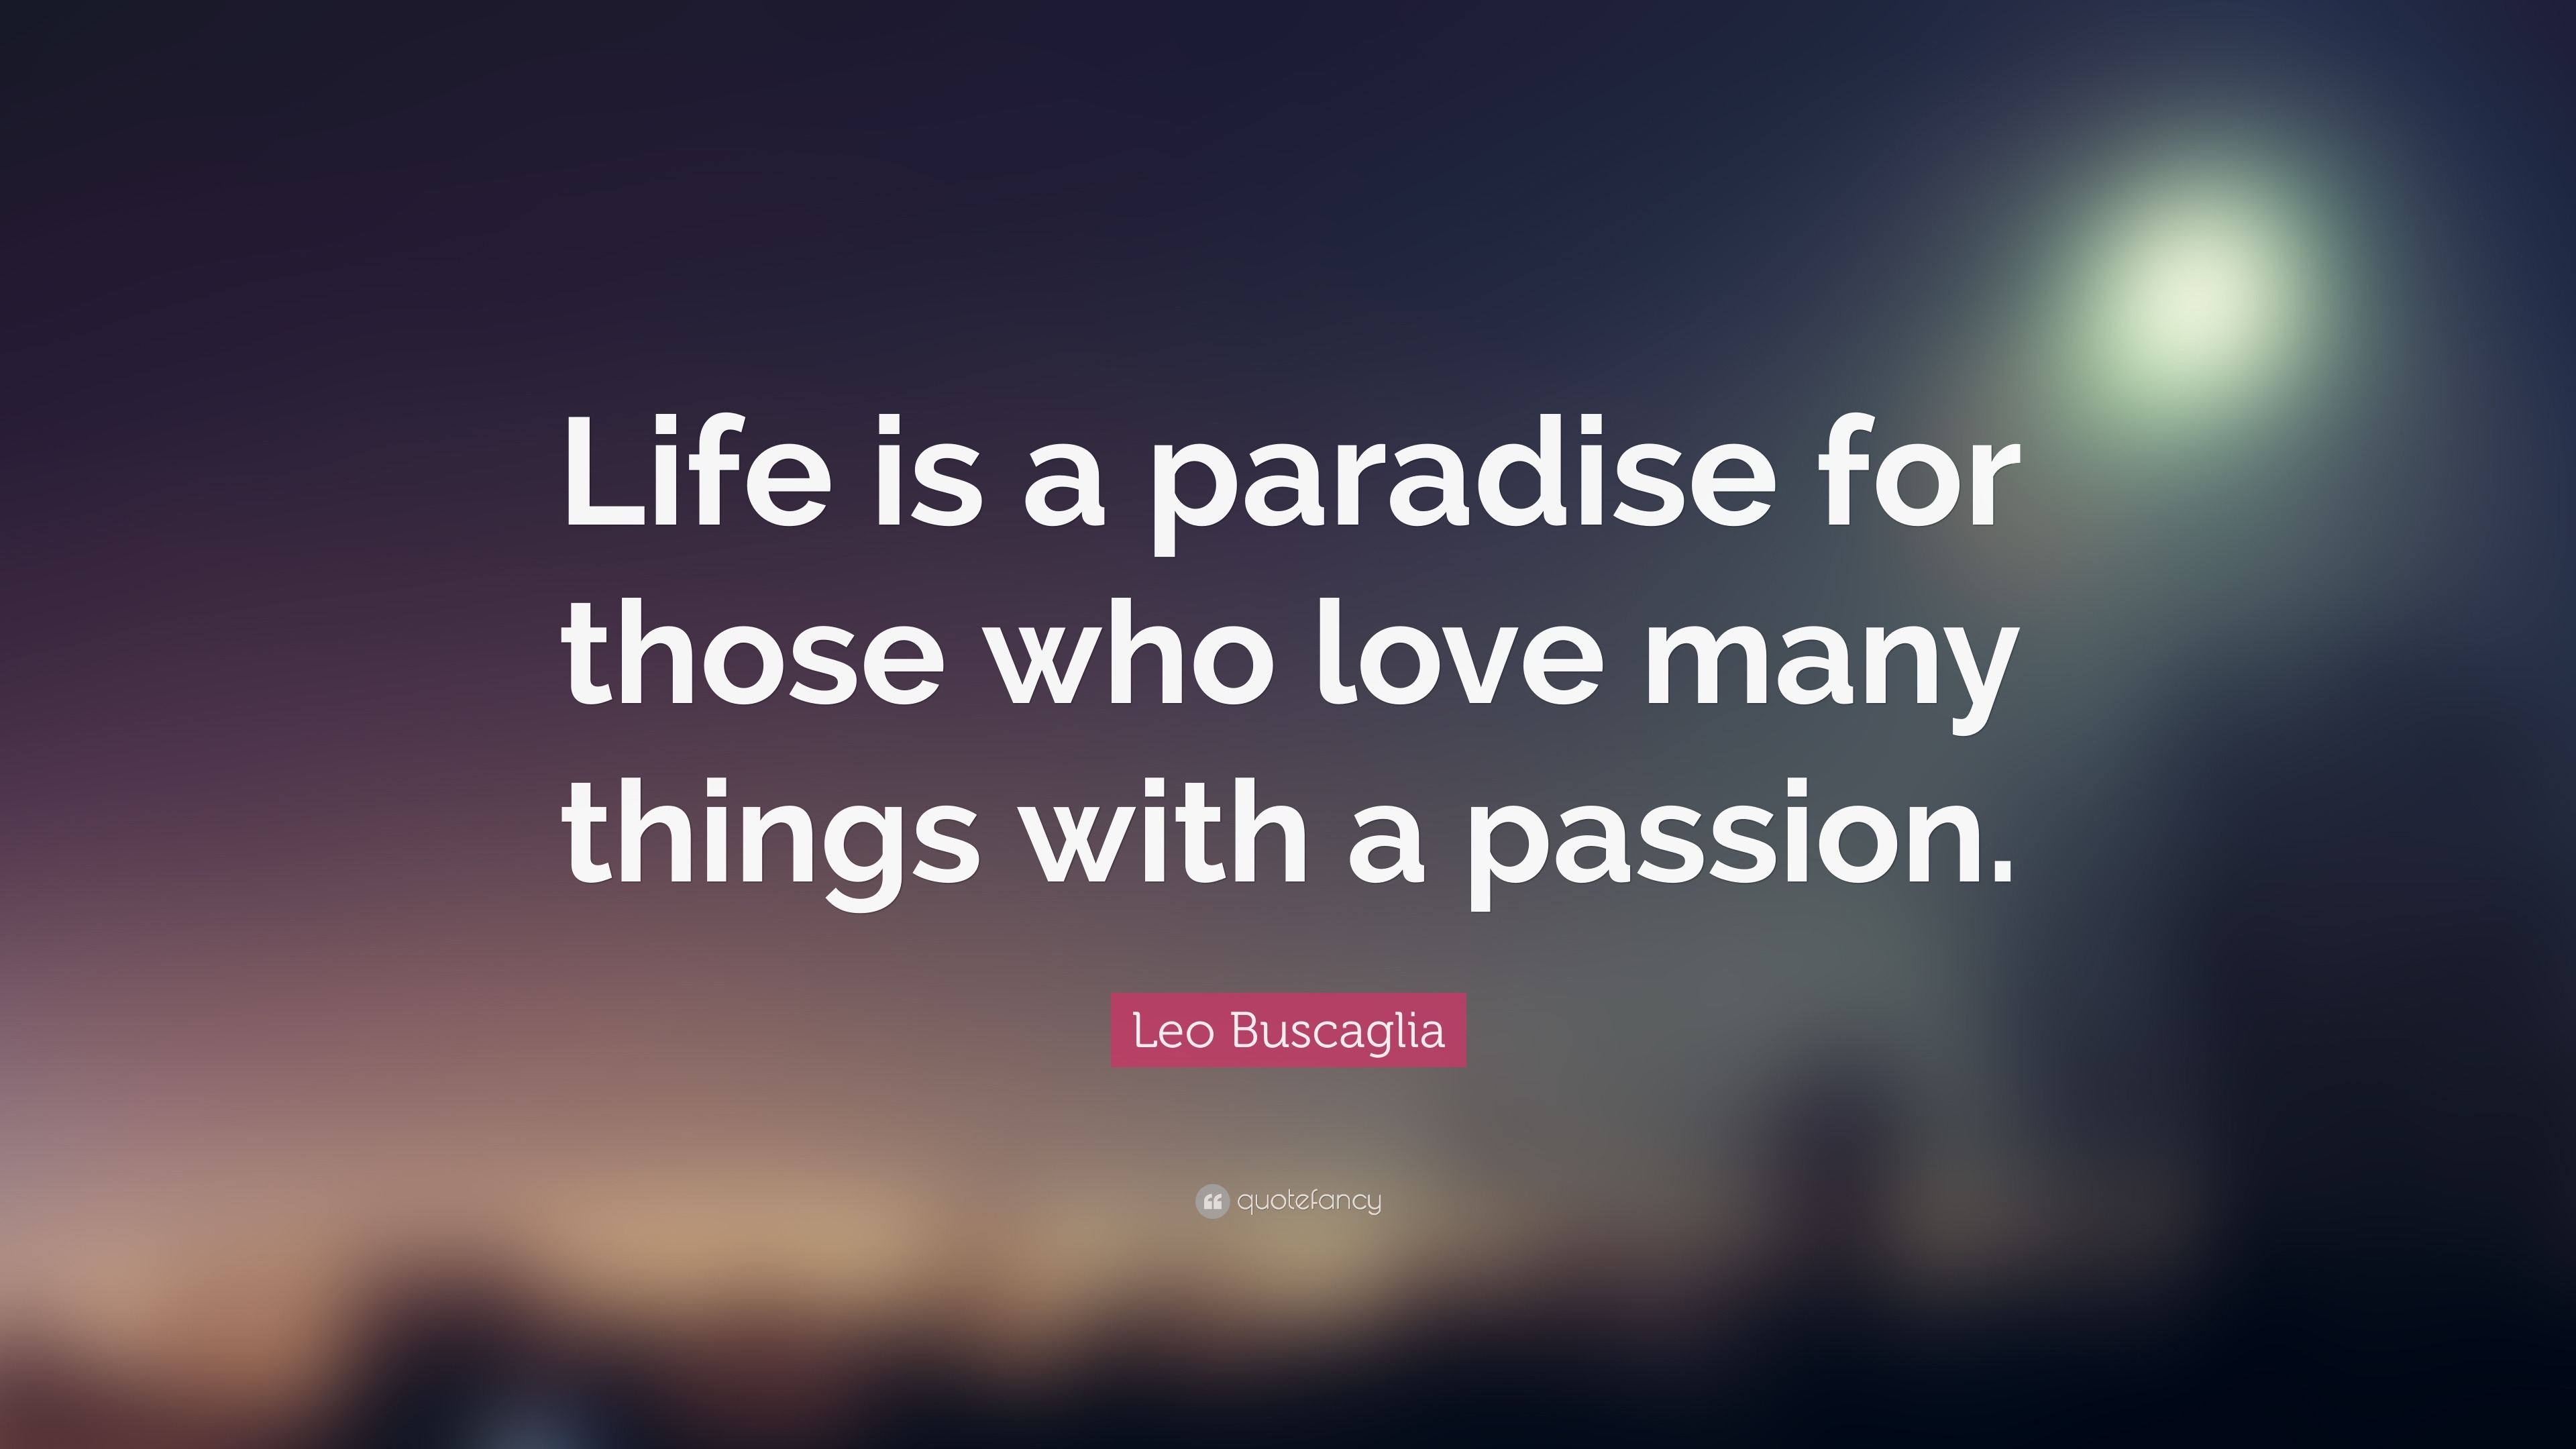 Leo Buscaglia Quote “Life is a paradise for those who love many things with